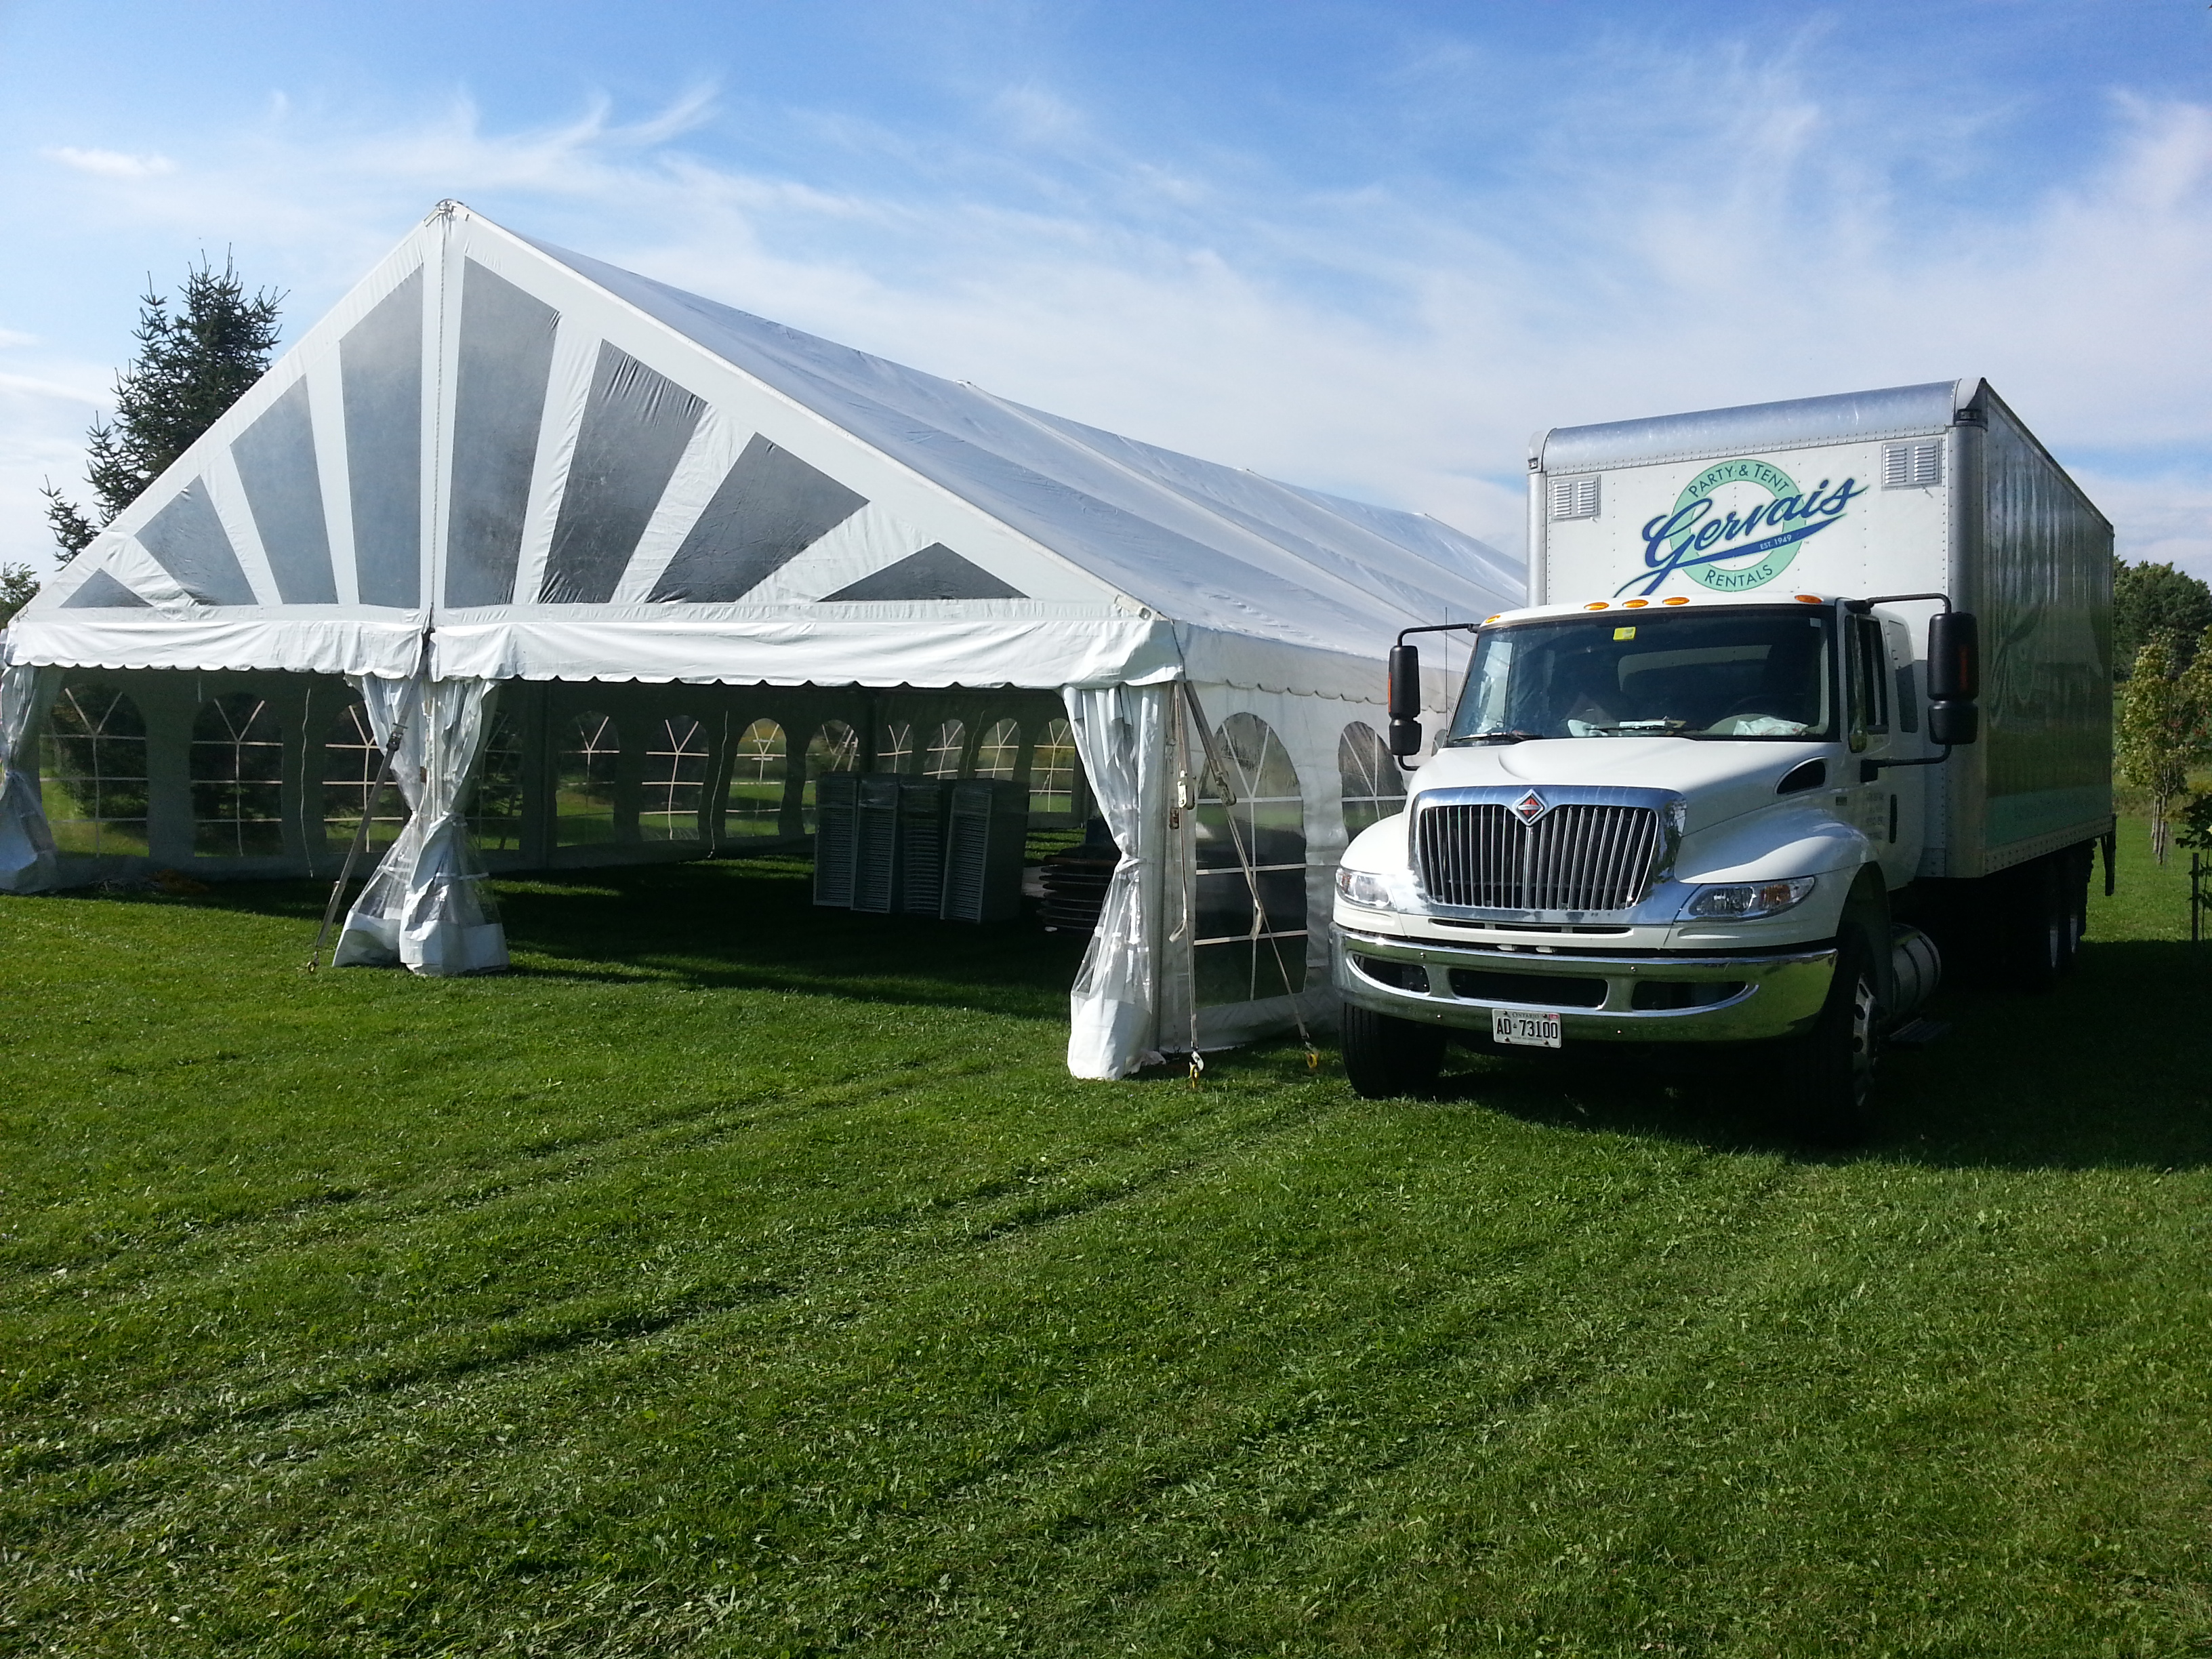 40X55 ULTIMATE FRAME TENT WHITE TOP (For up to 220 people just tables & chairs) 